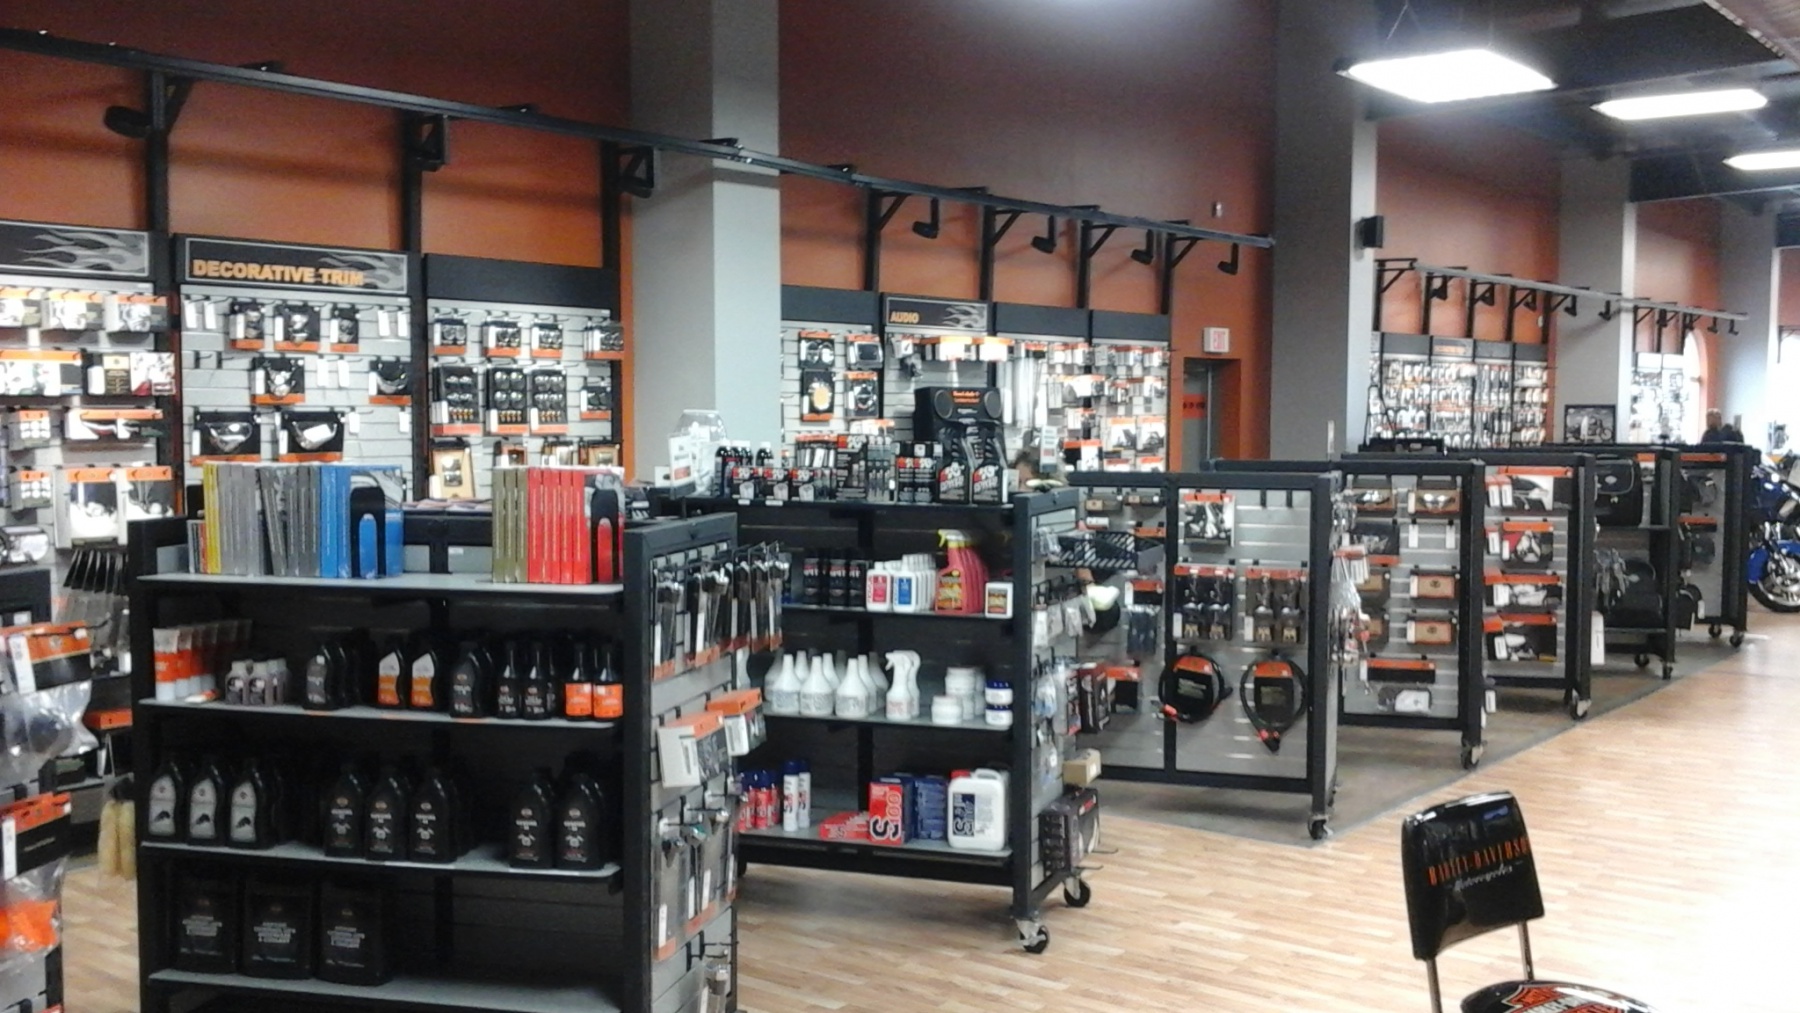 Nationwide Fixture Installations Inc Harley Davidson Case Study New Store Installation Millwork Packages Retail Rollouts Maintenance Program Management Signage